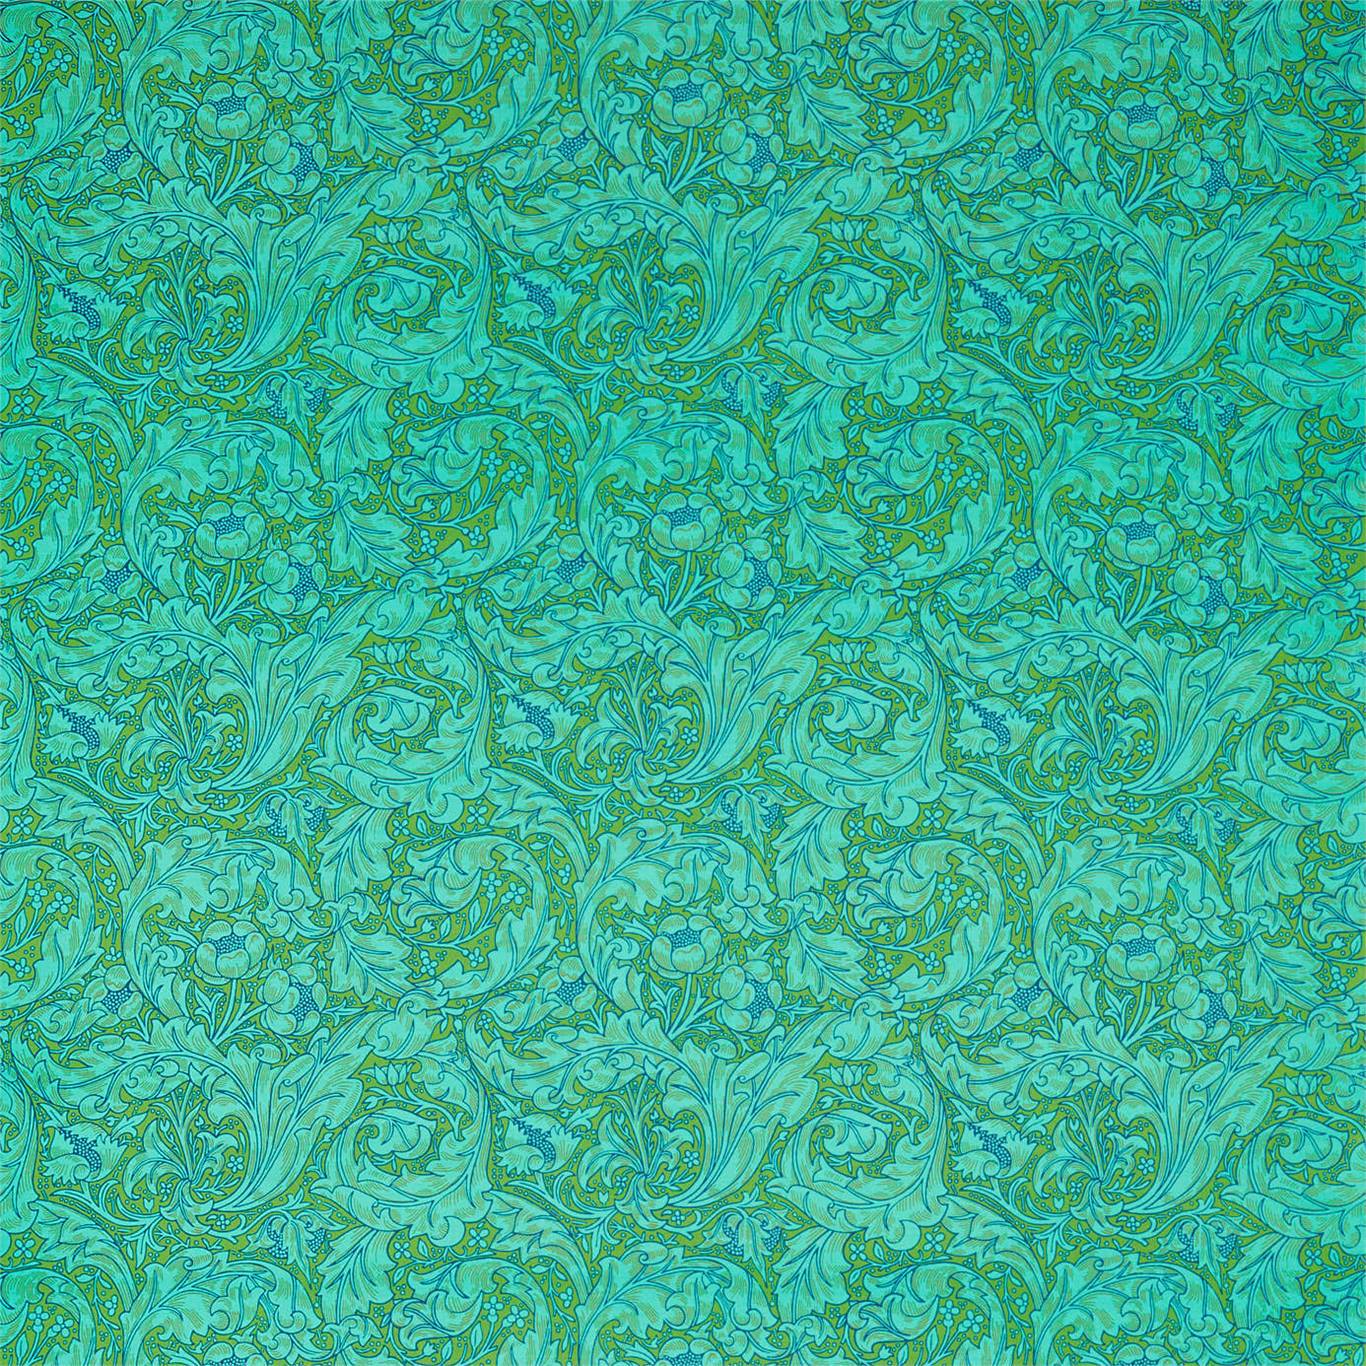 Bachelors Button Fabric by Morris & Co. - DBPF226840 - Olive/Turquoise